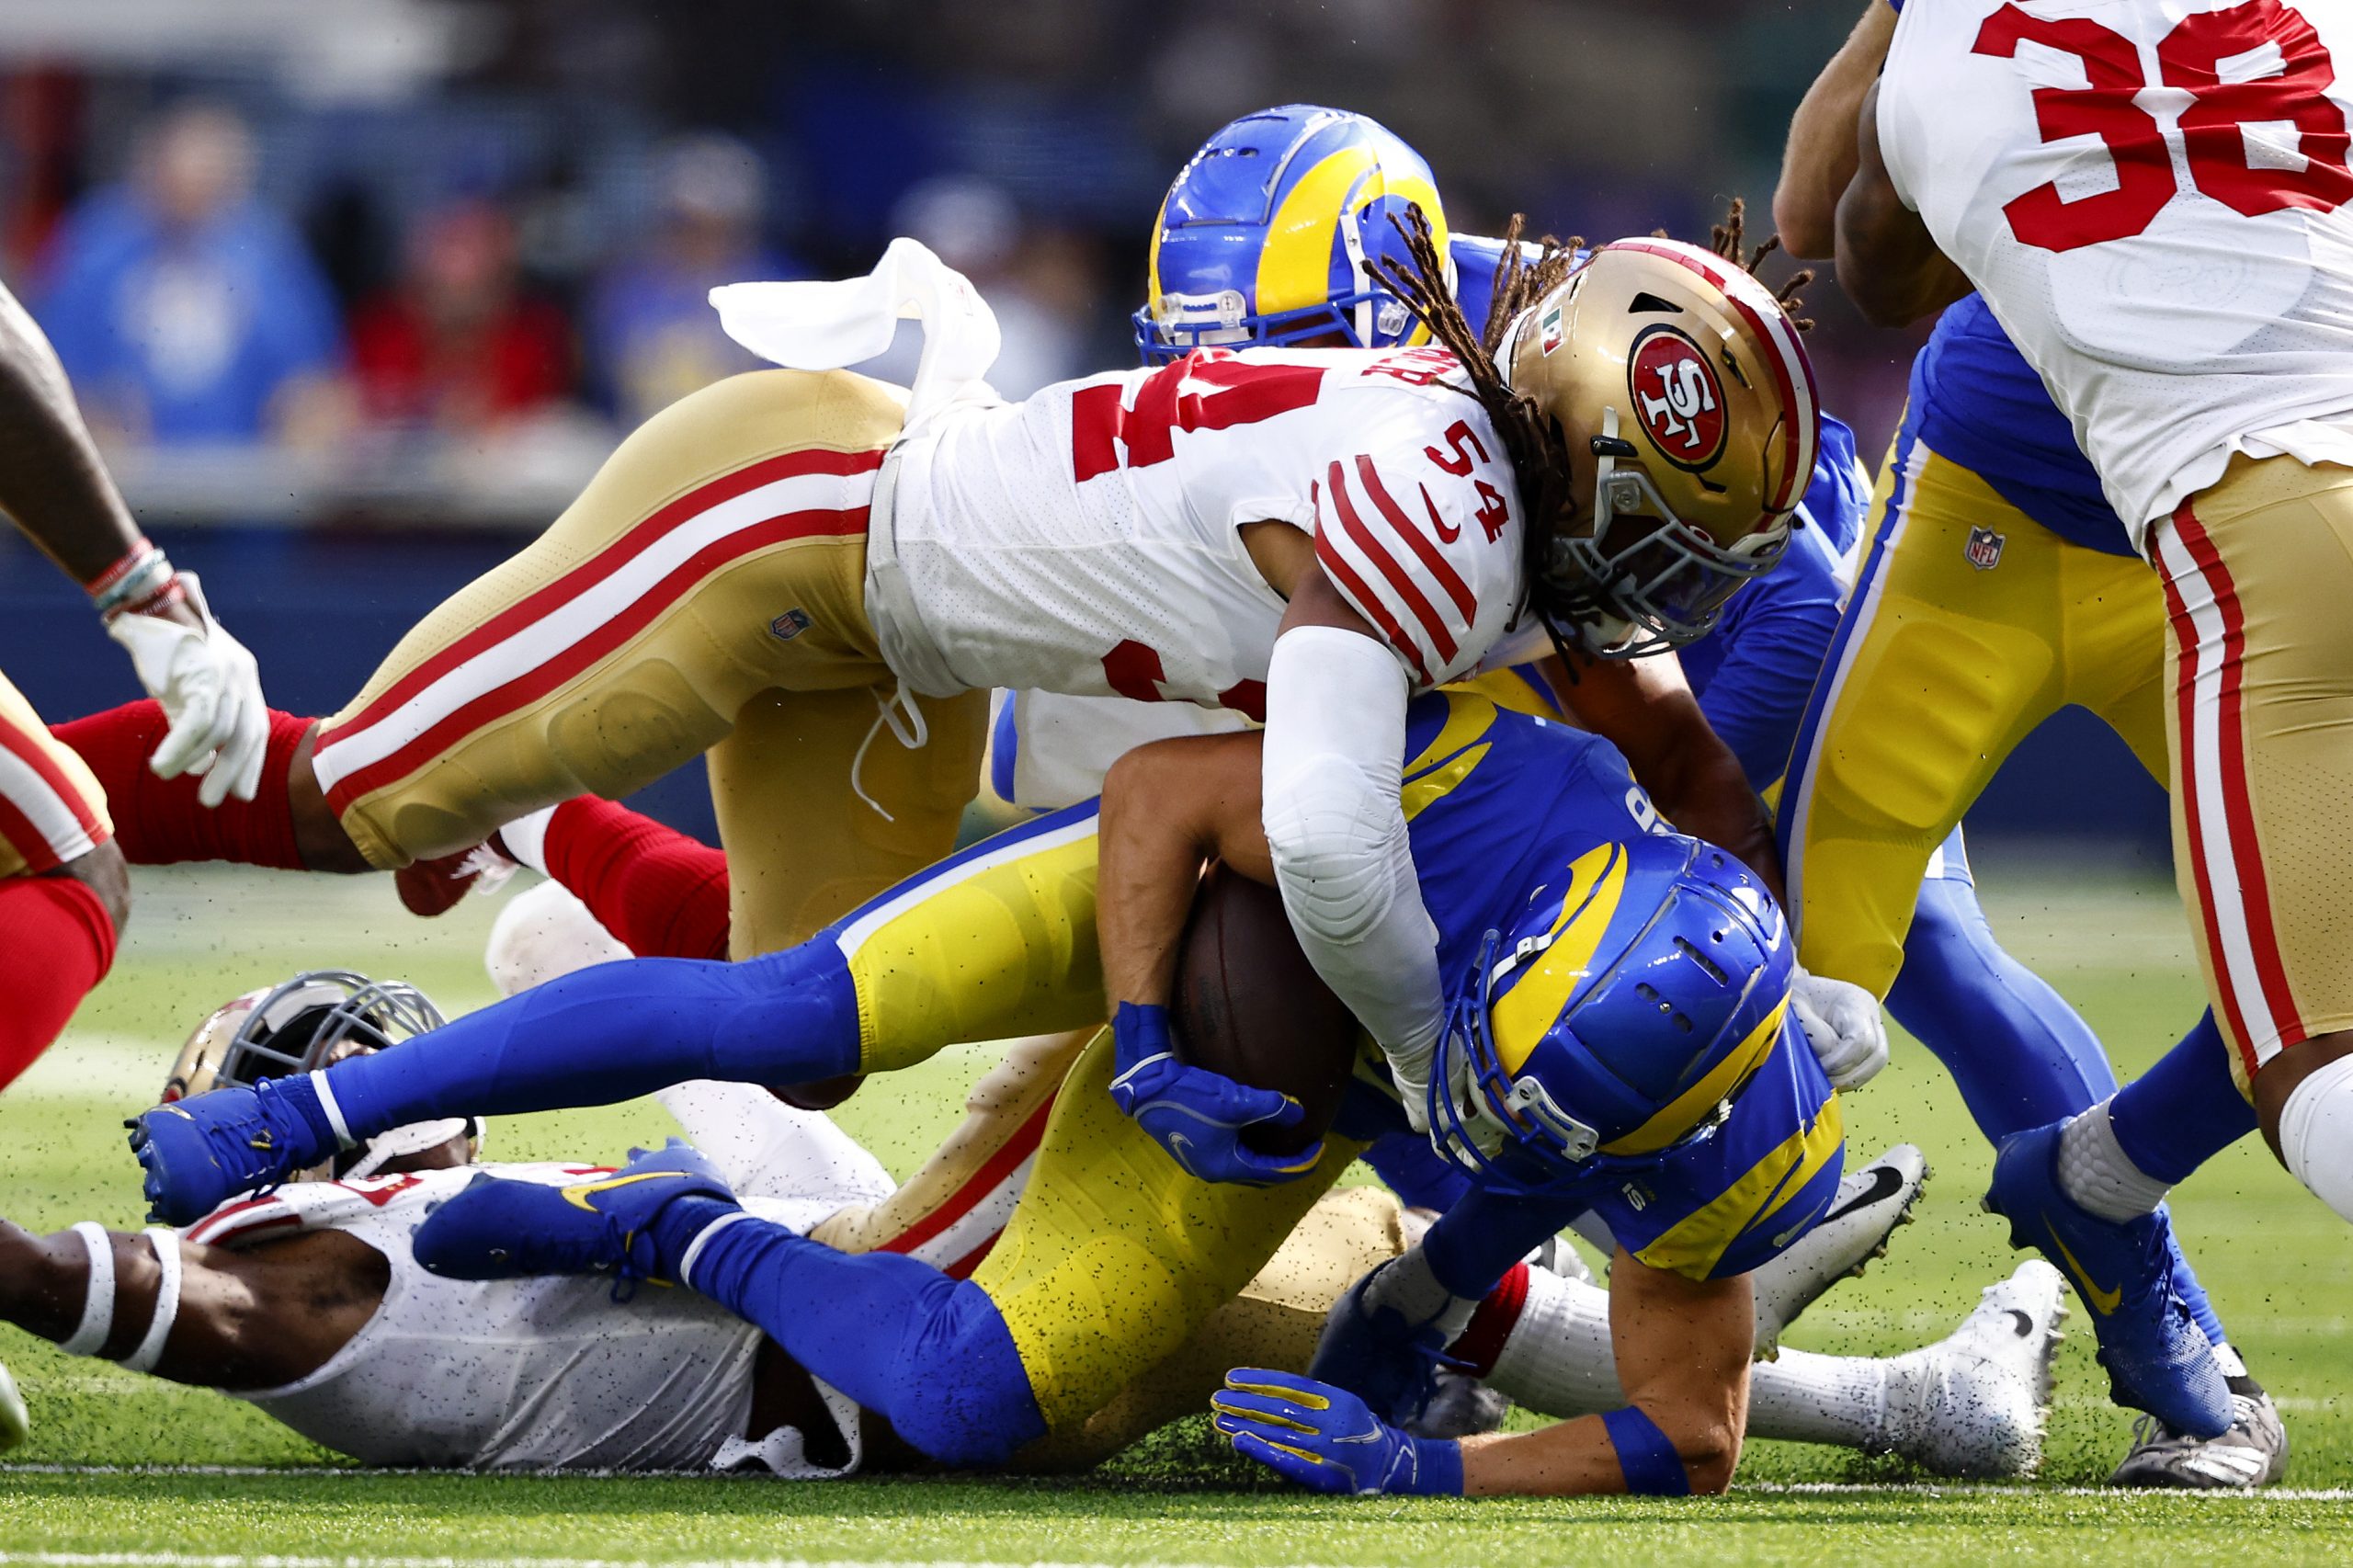 Cooper Kupp #10 of the Los Angeles Rams is tackled by Fred Warner #54 of the San Francisco 49ers du...